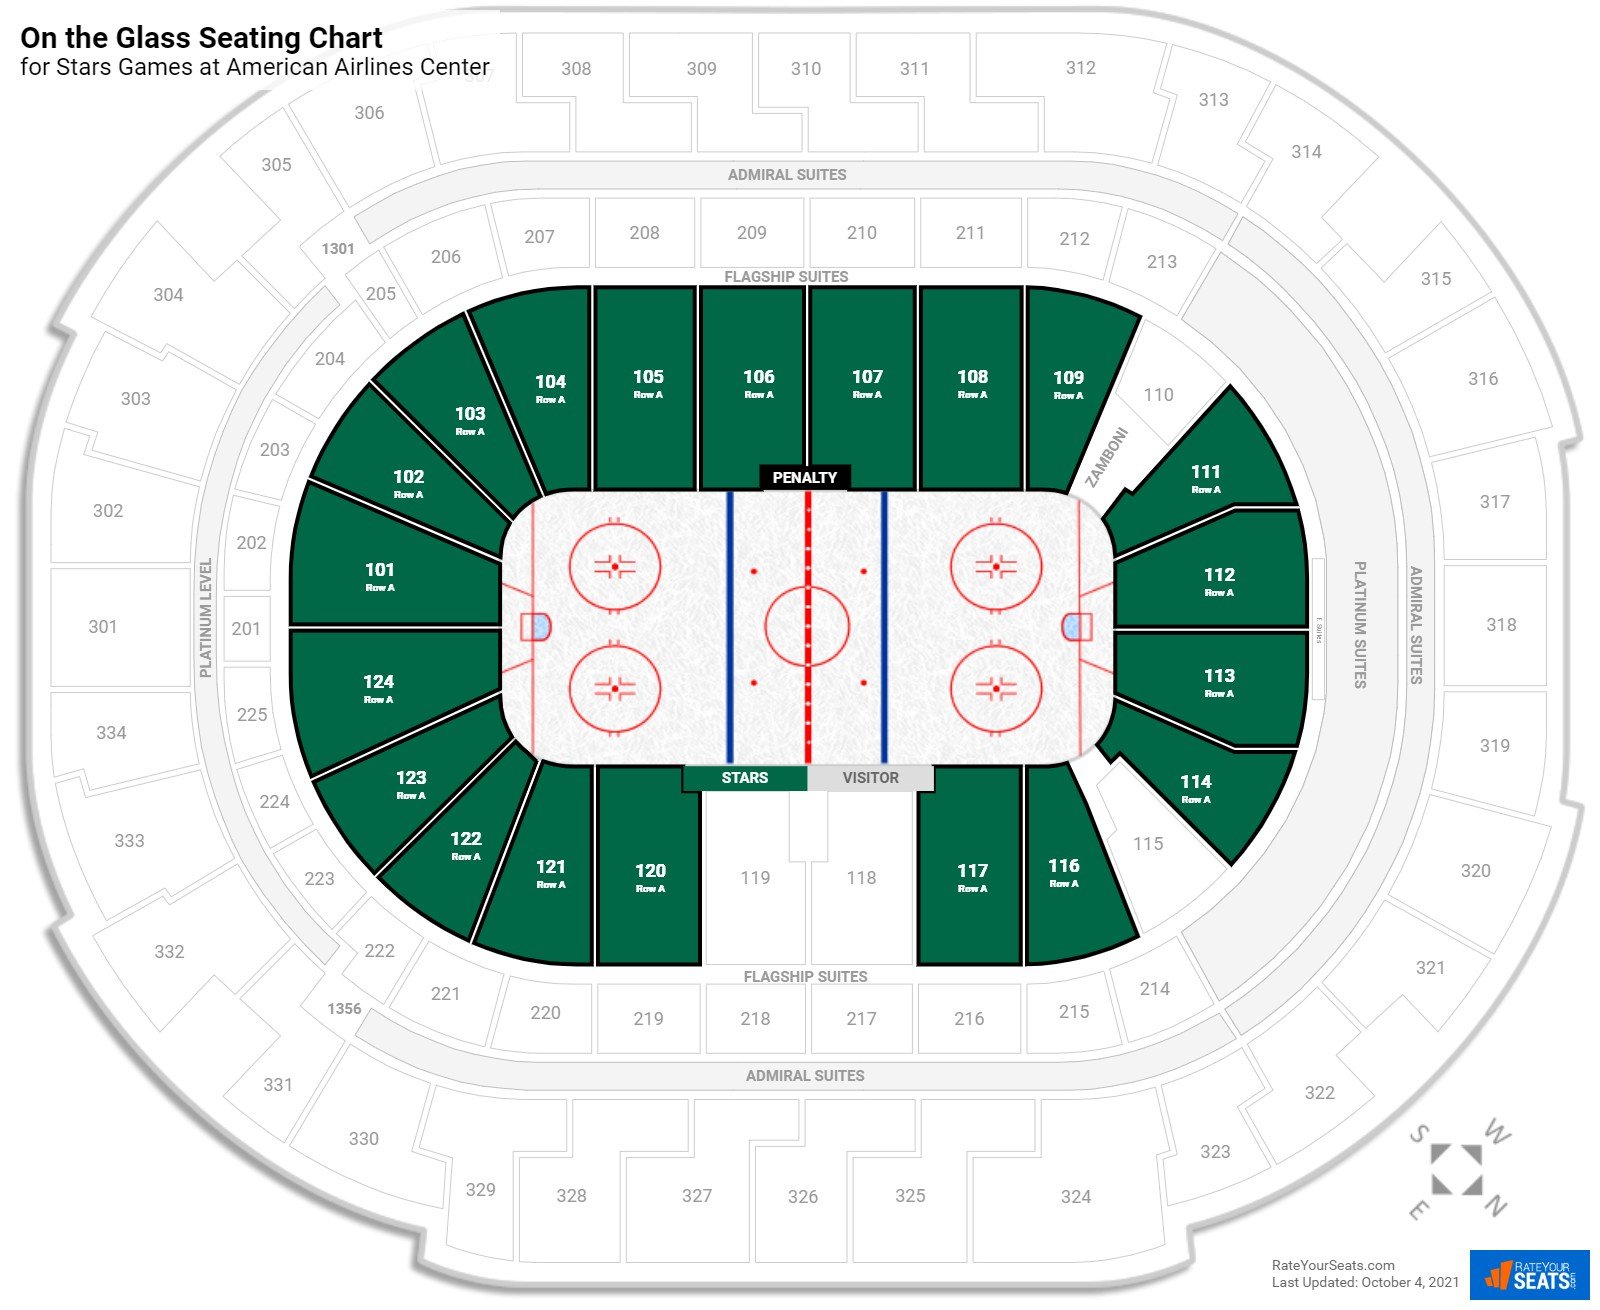 Stars On the Glass Seating Chart at American Airlines Center